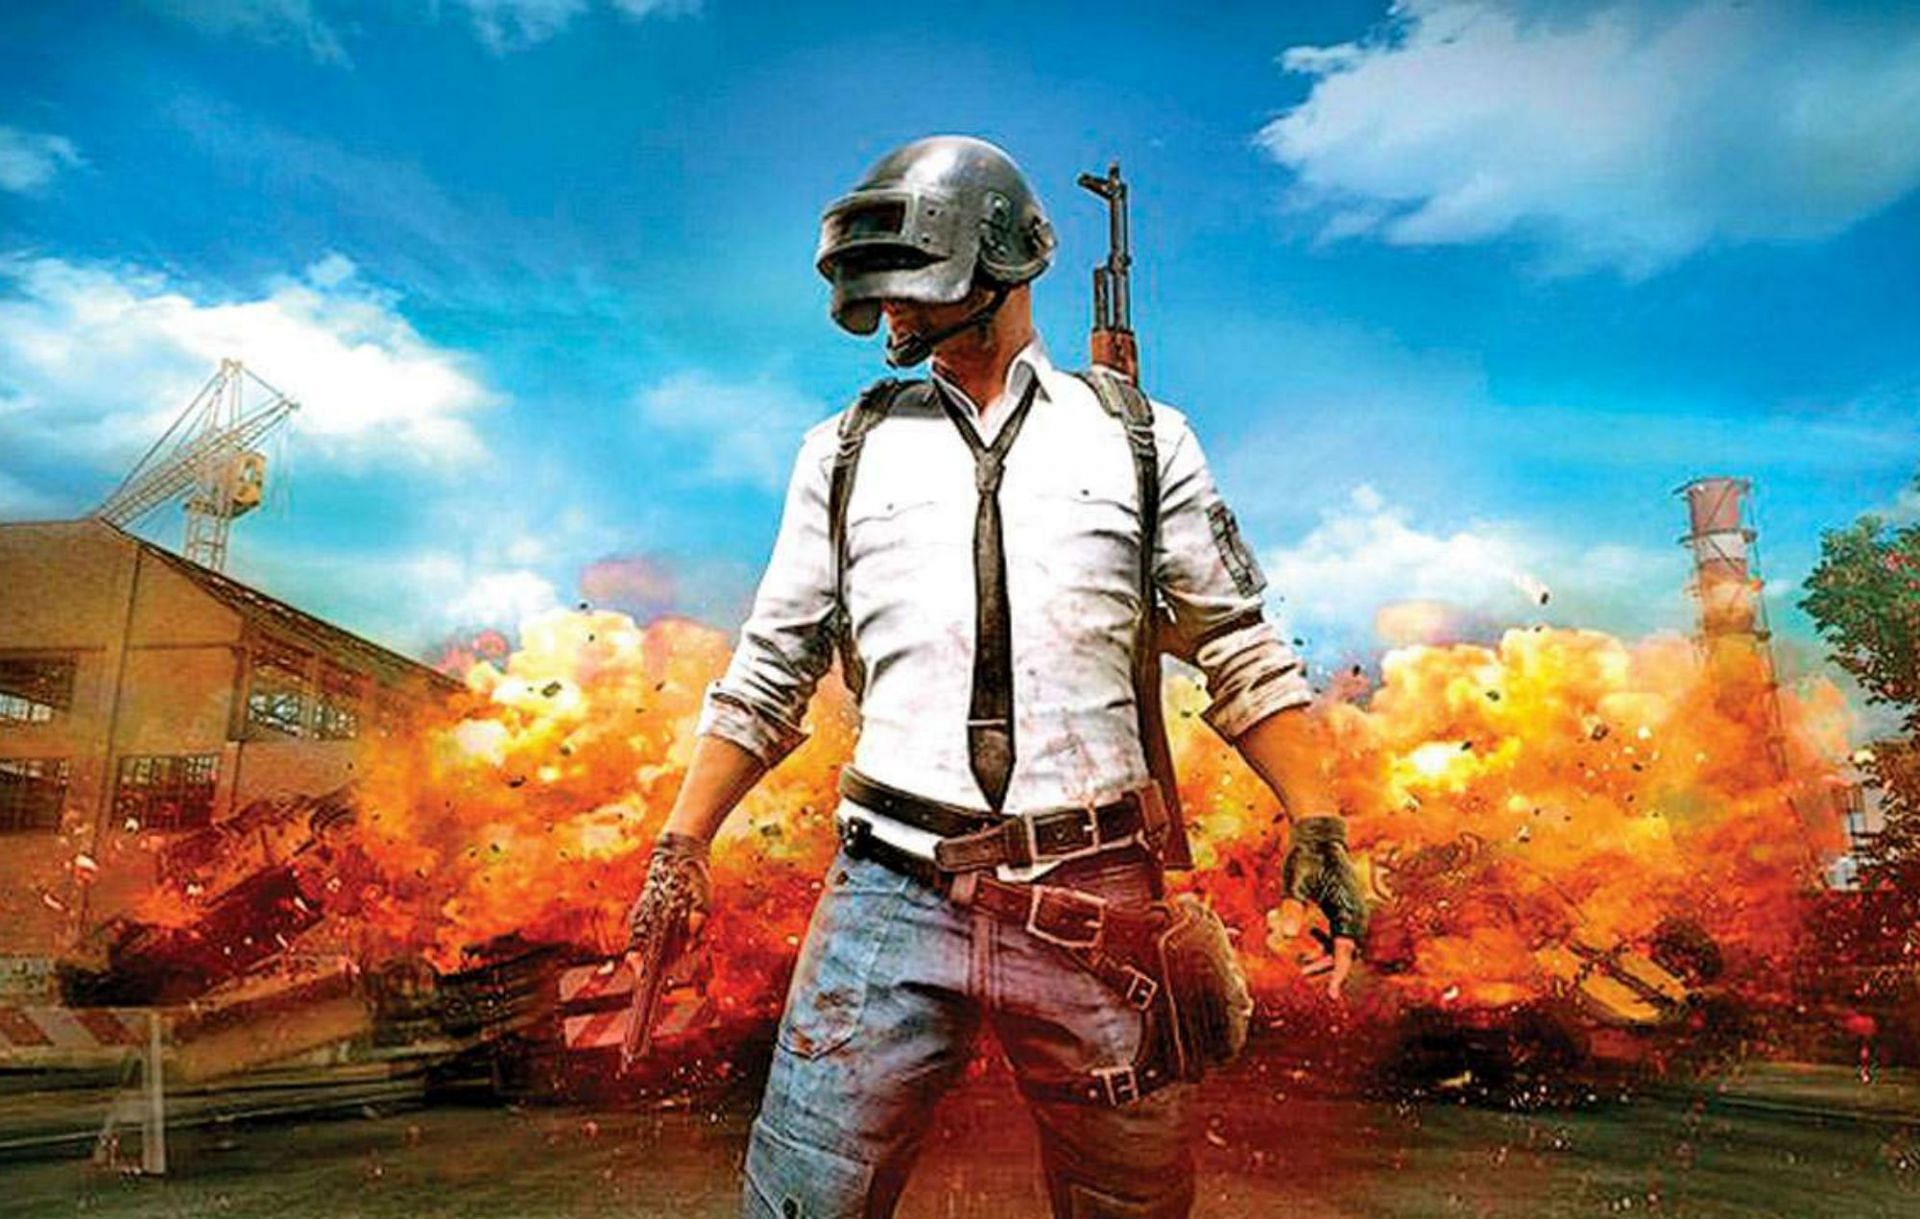 A promotional image for PUBG. (Image via PlayerUnknown)